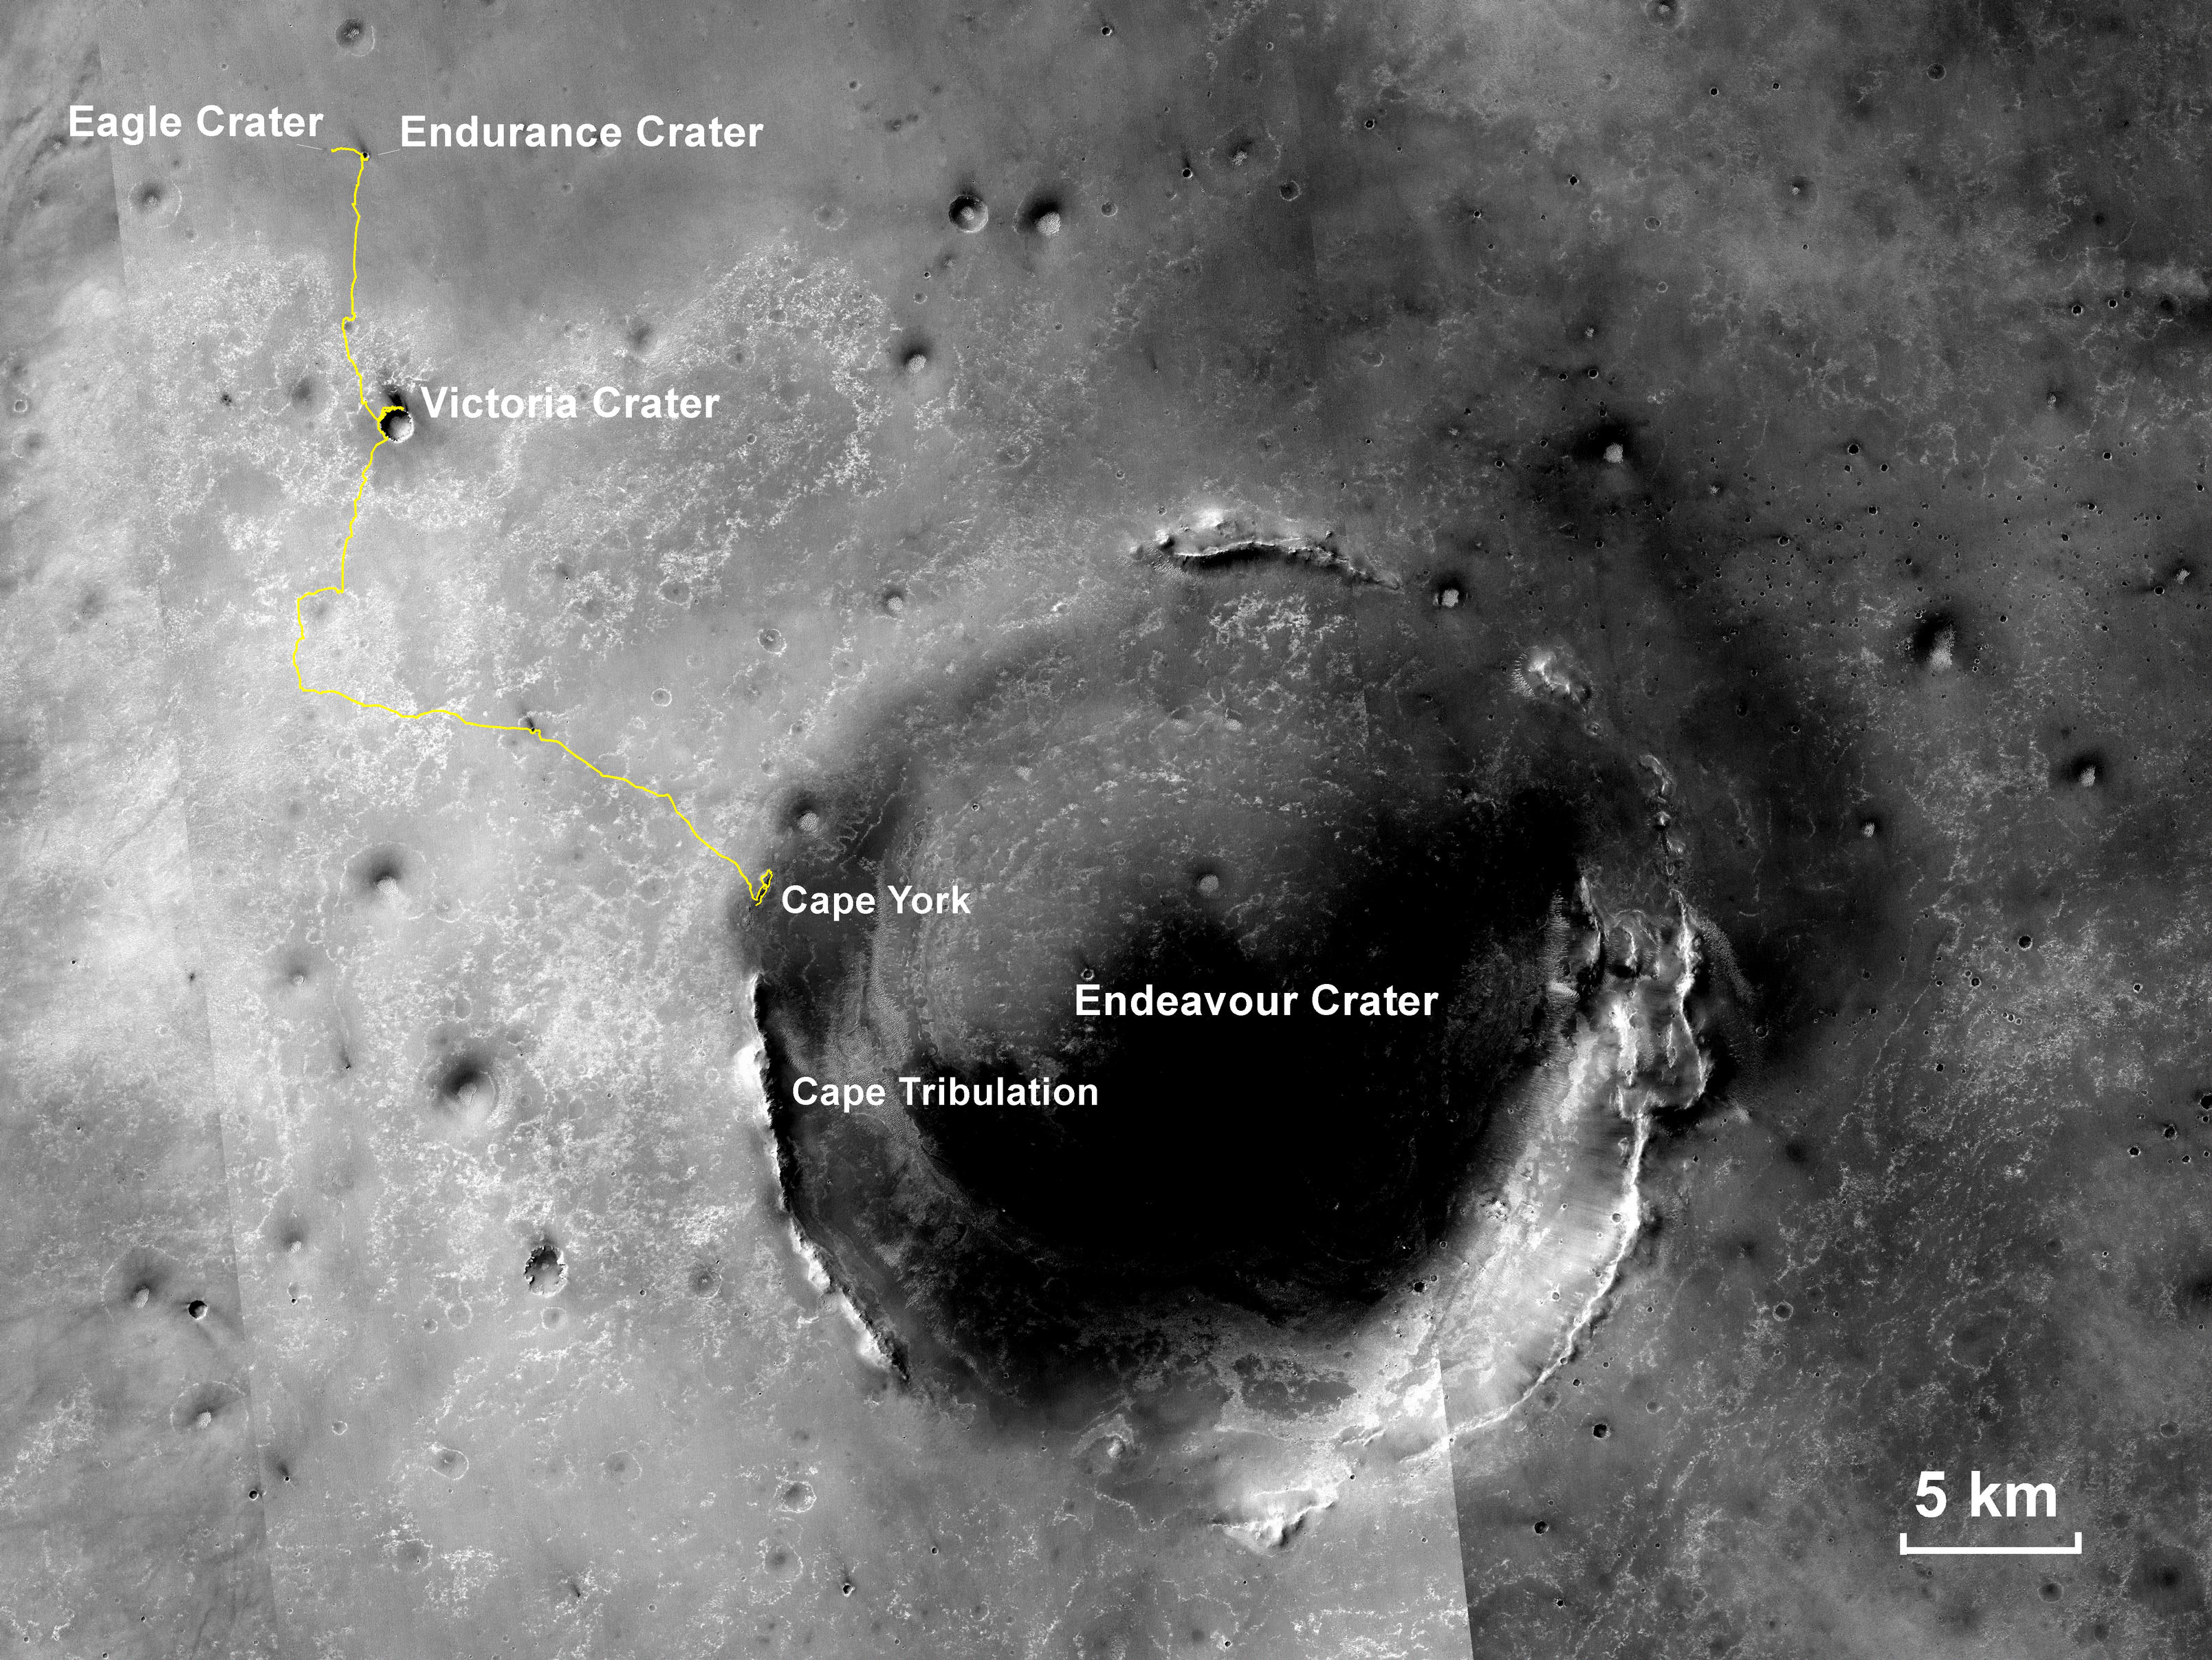 This map shows the 22.553-mile (36.295-kilometer) route driven by NASA's Mars Exploration Rover Opportunity from the site of its landing, inside Eagle crater at the upper left, to its location more than 112 months later, in late May 2013, departing the "Cape York" section of the rim of Endeavour crater.